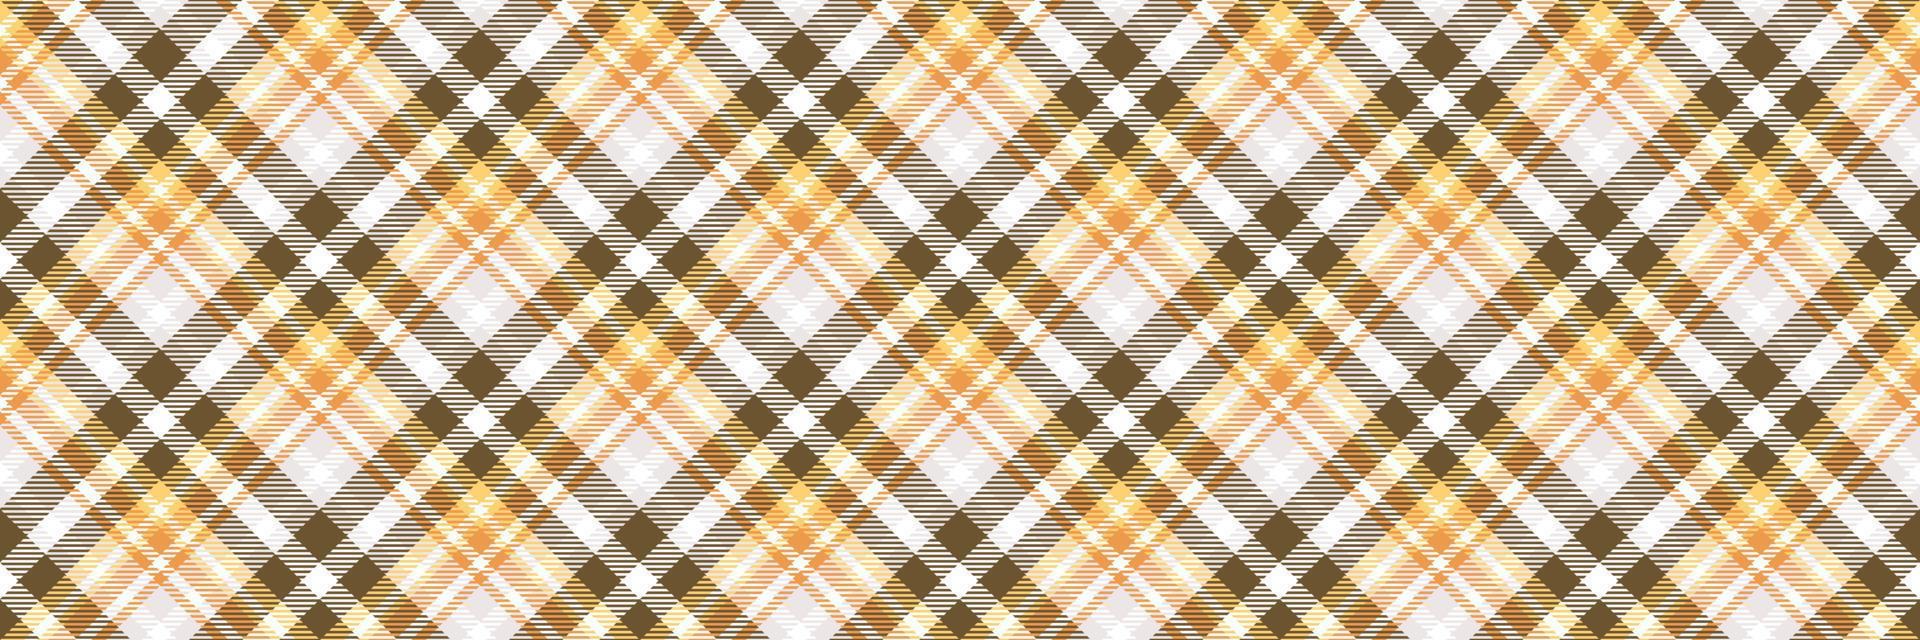 Vector plaid seamless pattern is a patterned cloth consisting of criss crossed, horizontal and vertical bands in multiple colours.plaid Seamless for  scarf,pyjamas,blanket,duvet,kilt large shawl.